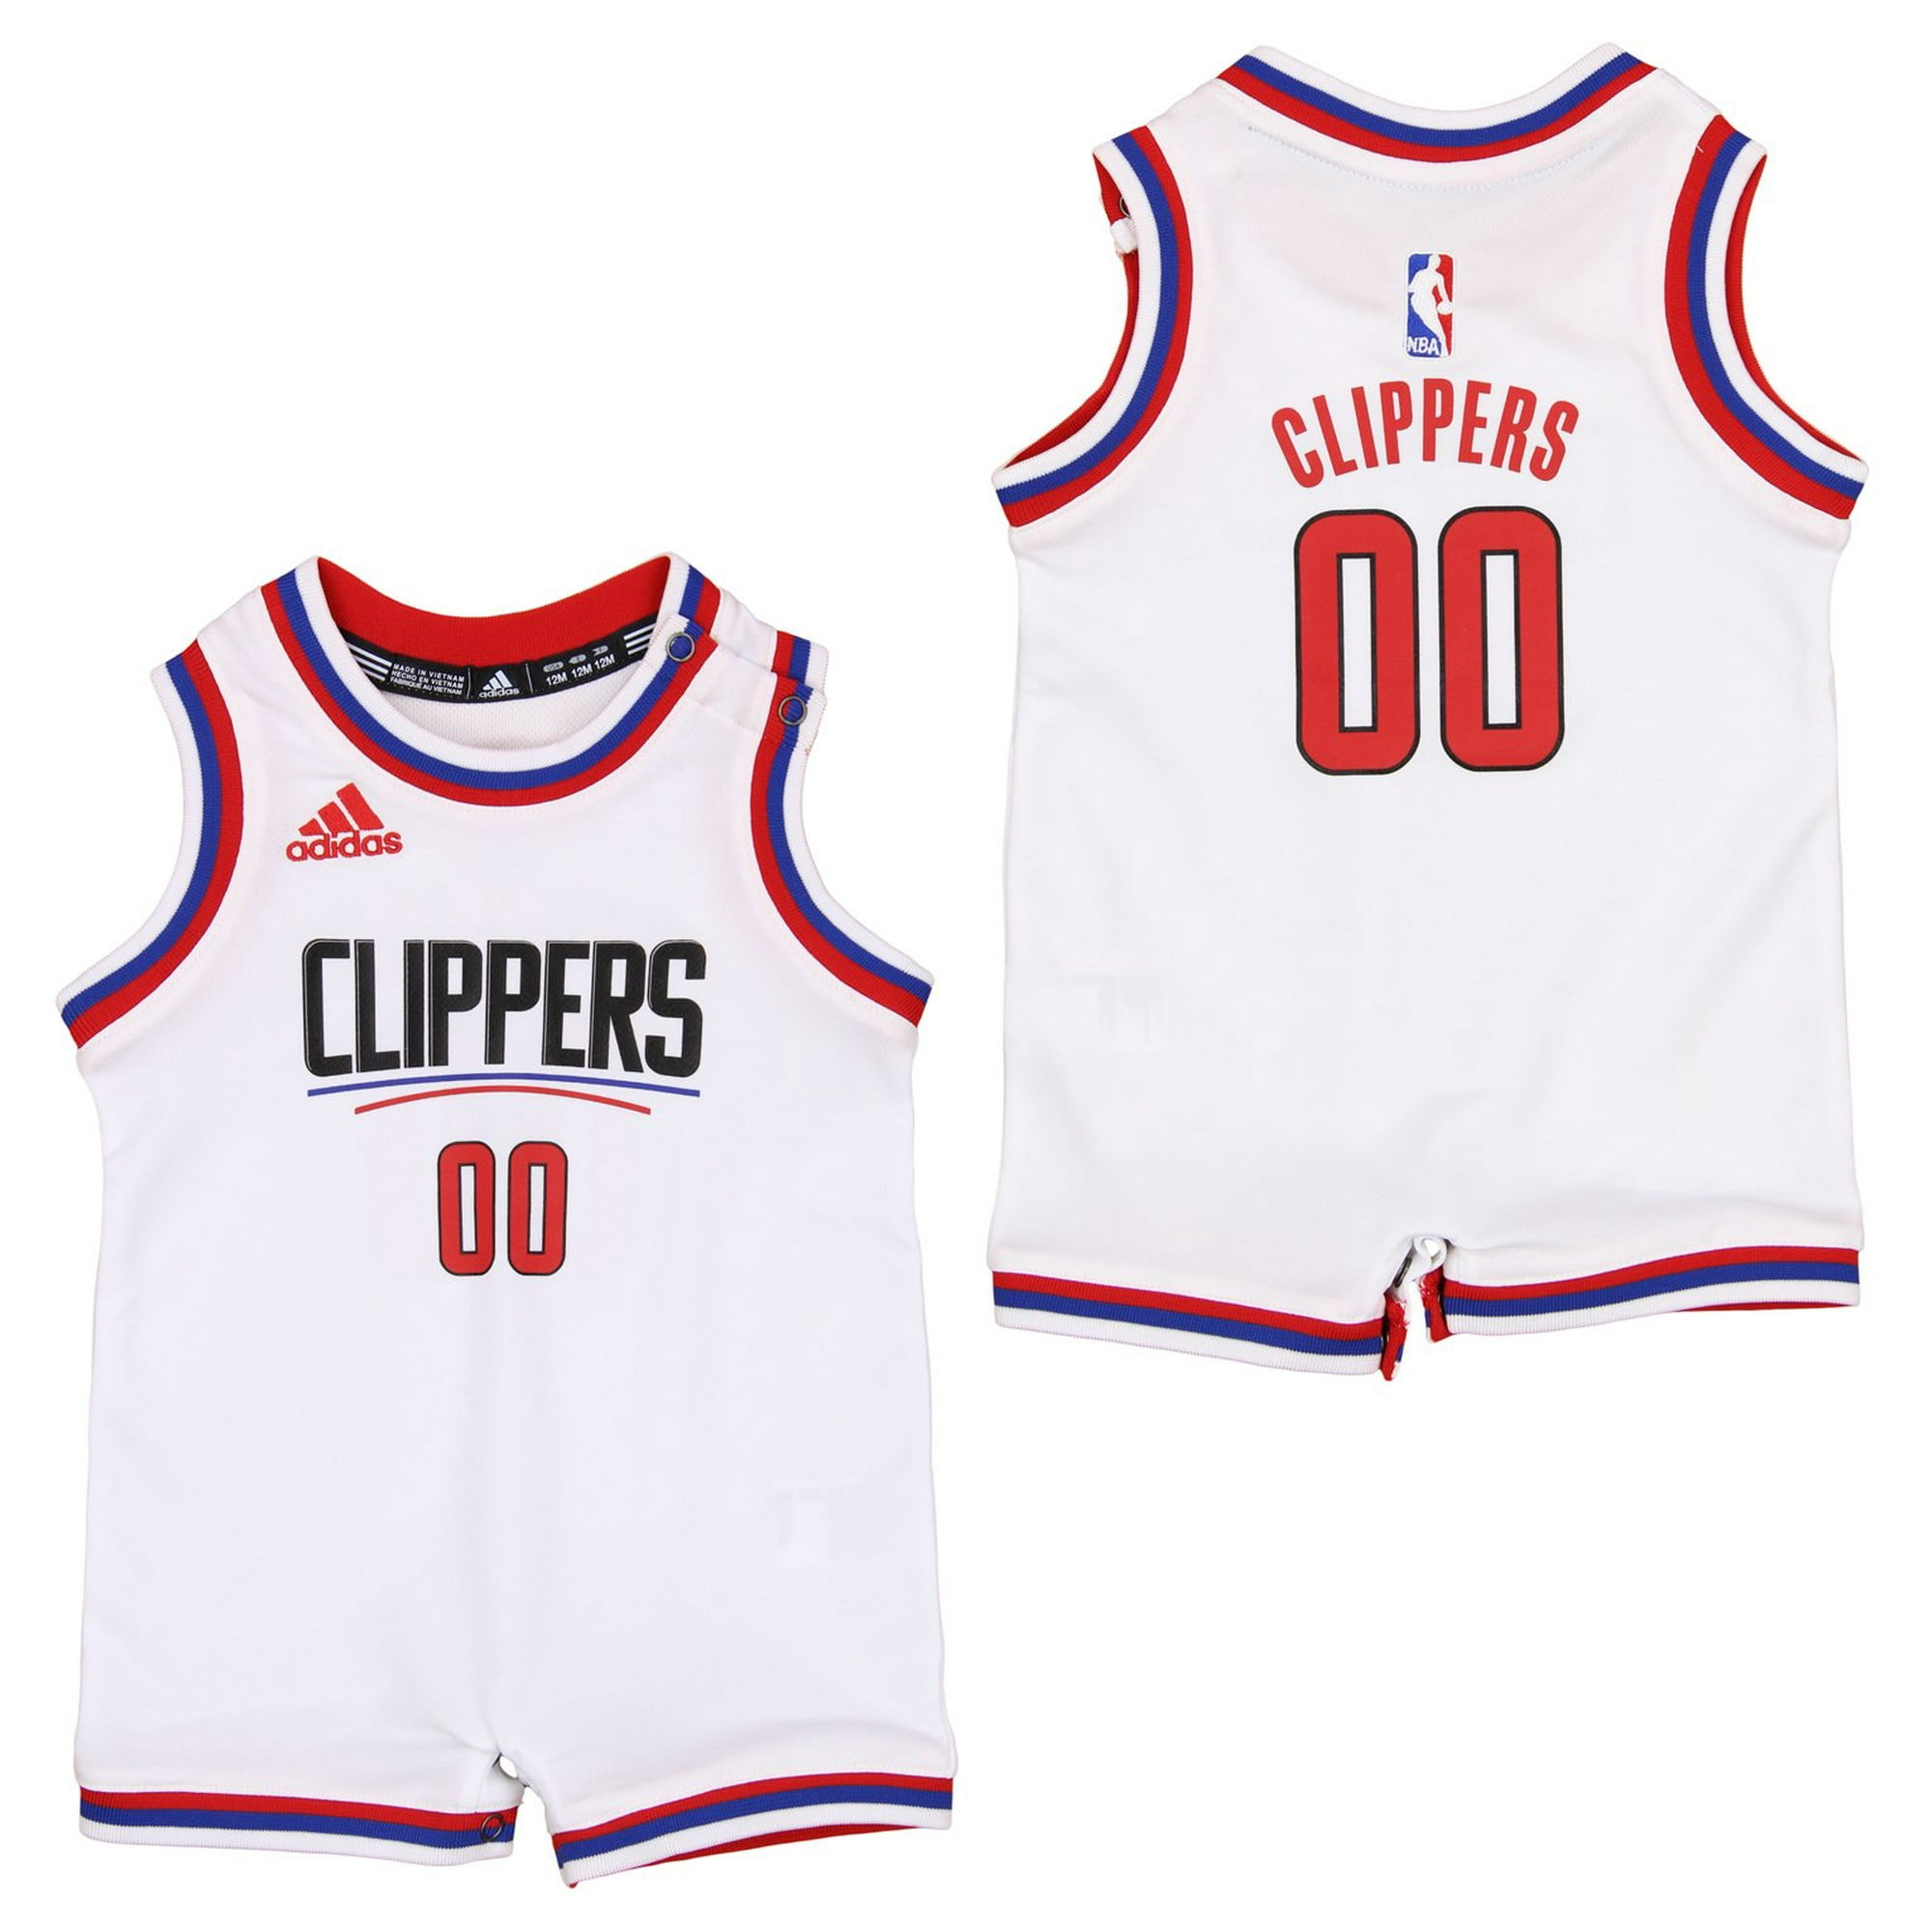 Adidas NBA Infants Los Angeles Clippers #00 Home Jersey Romper, White 